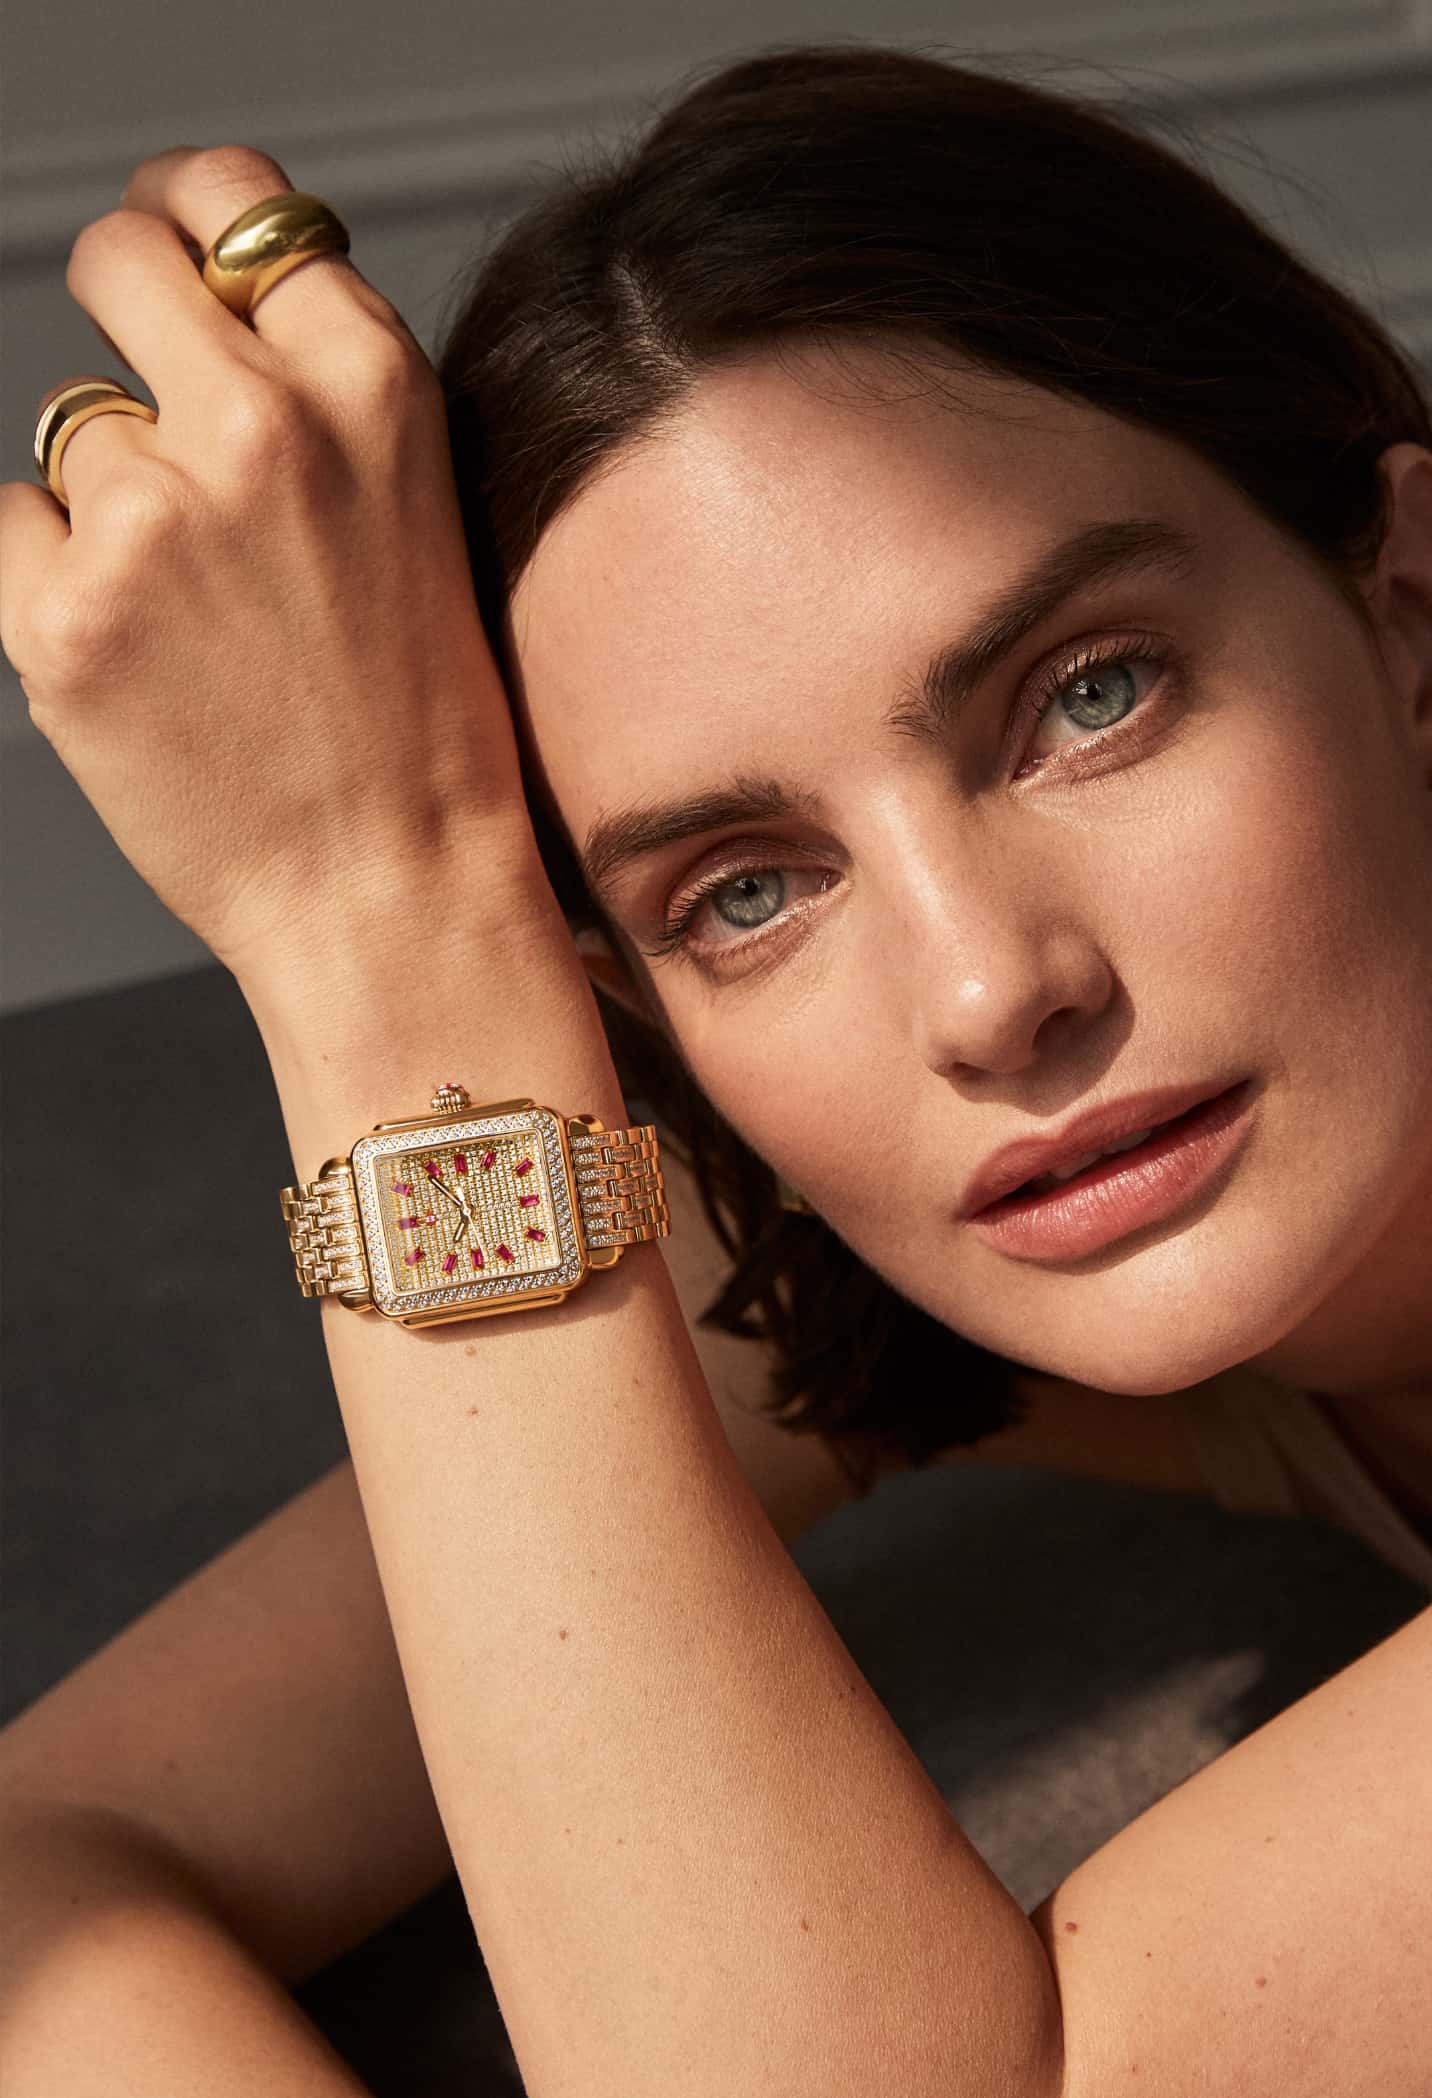 Woman wearing a Limited Edition watch.